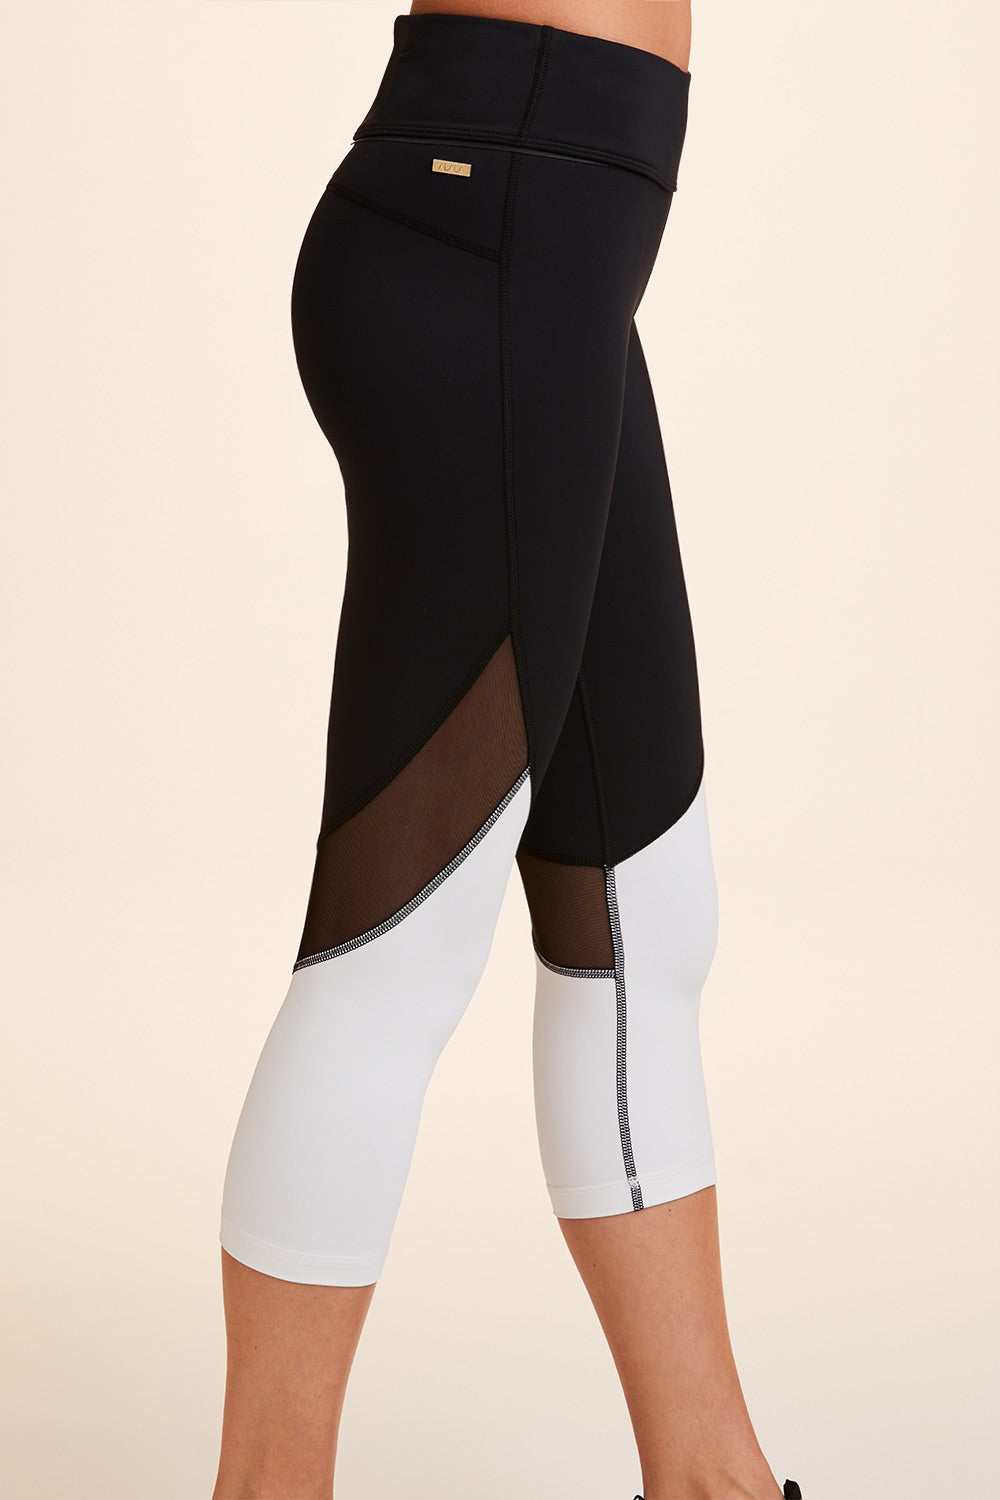 Side view close-up of Alala Women's Luxury Athleisure cropped black and white tight with mesh paneling on back of knees.